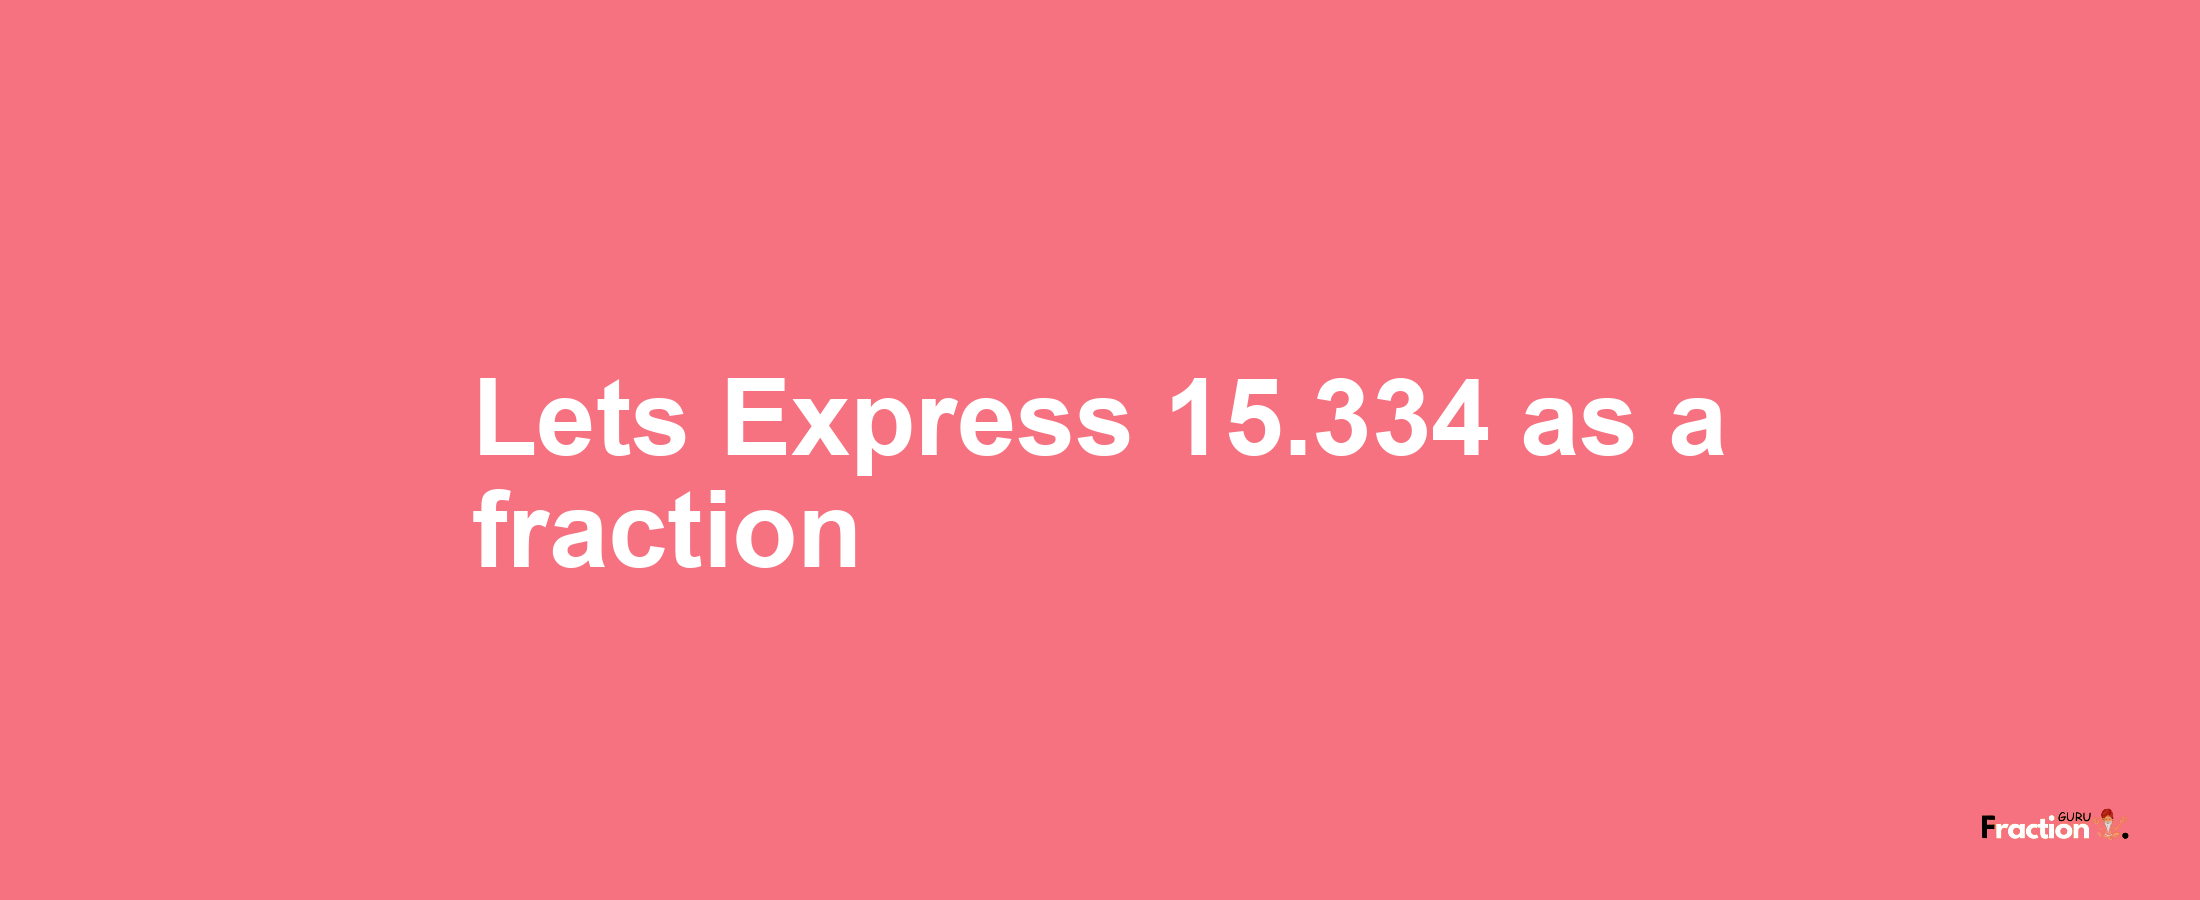 Lets Express 15.334 as afraction